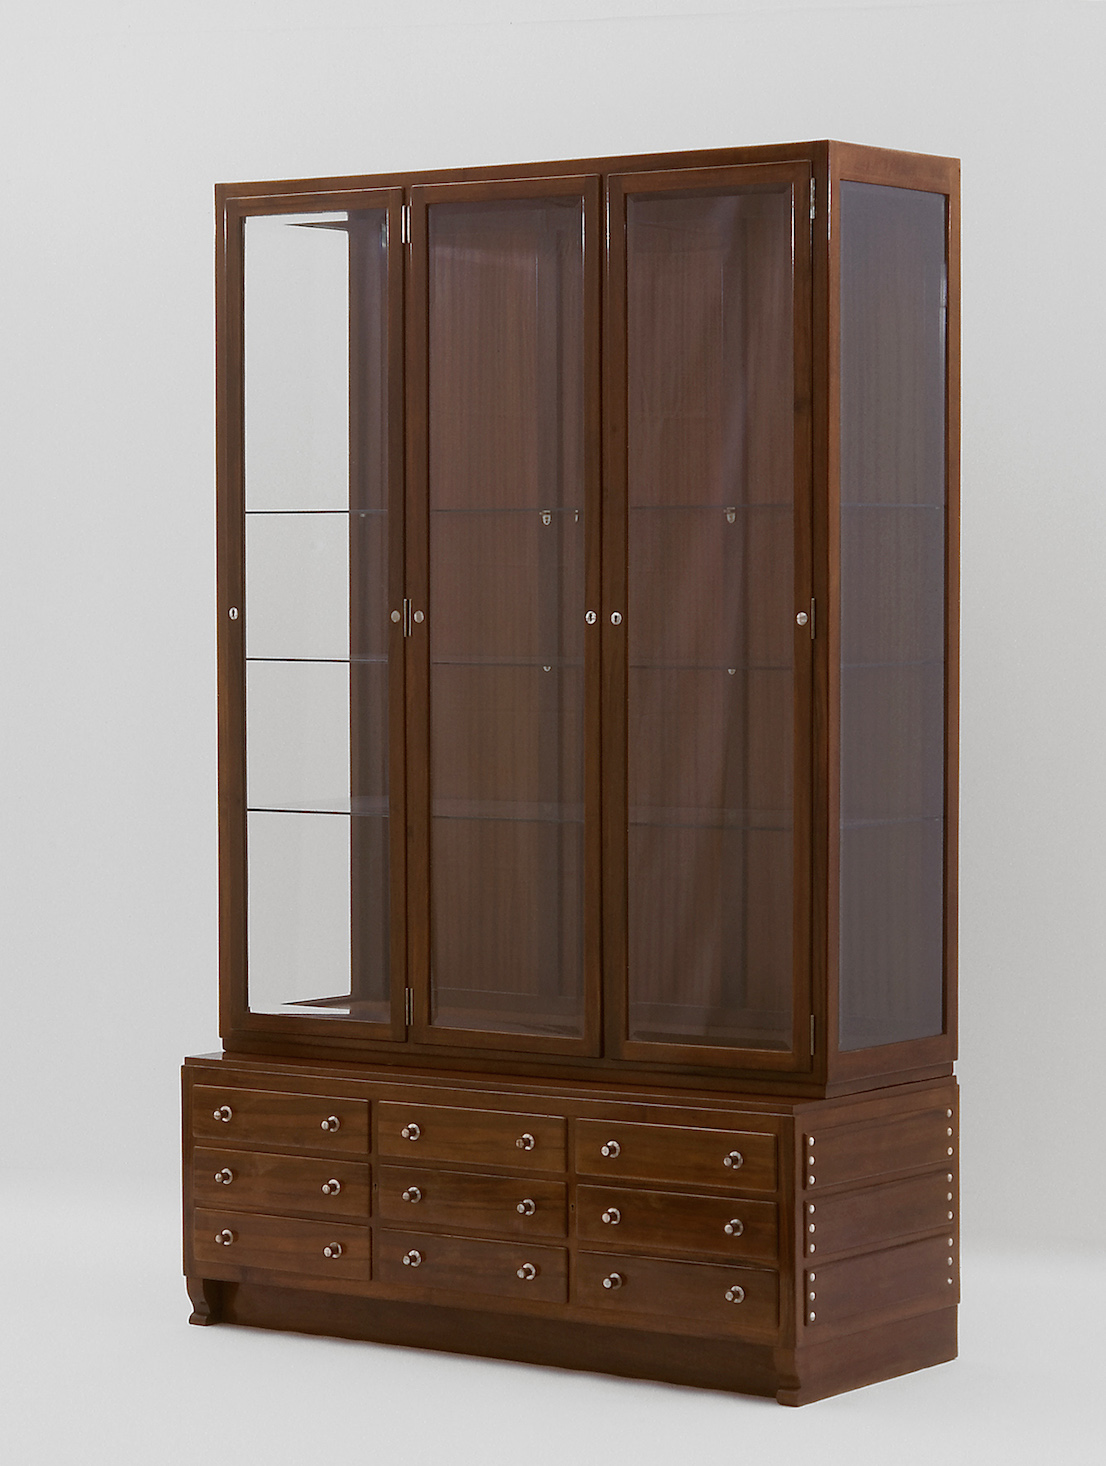 Otto Wagner dining room cabinet for Wagner’s apartment on Köstlergasse, 1899 © MAK/Georg Mayer